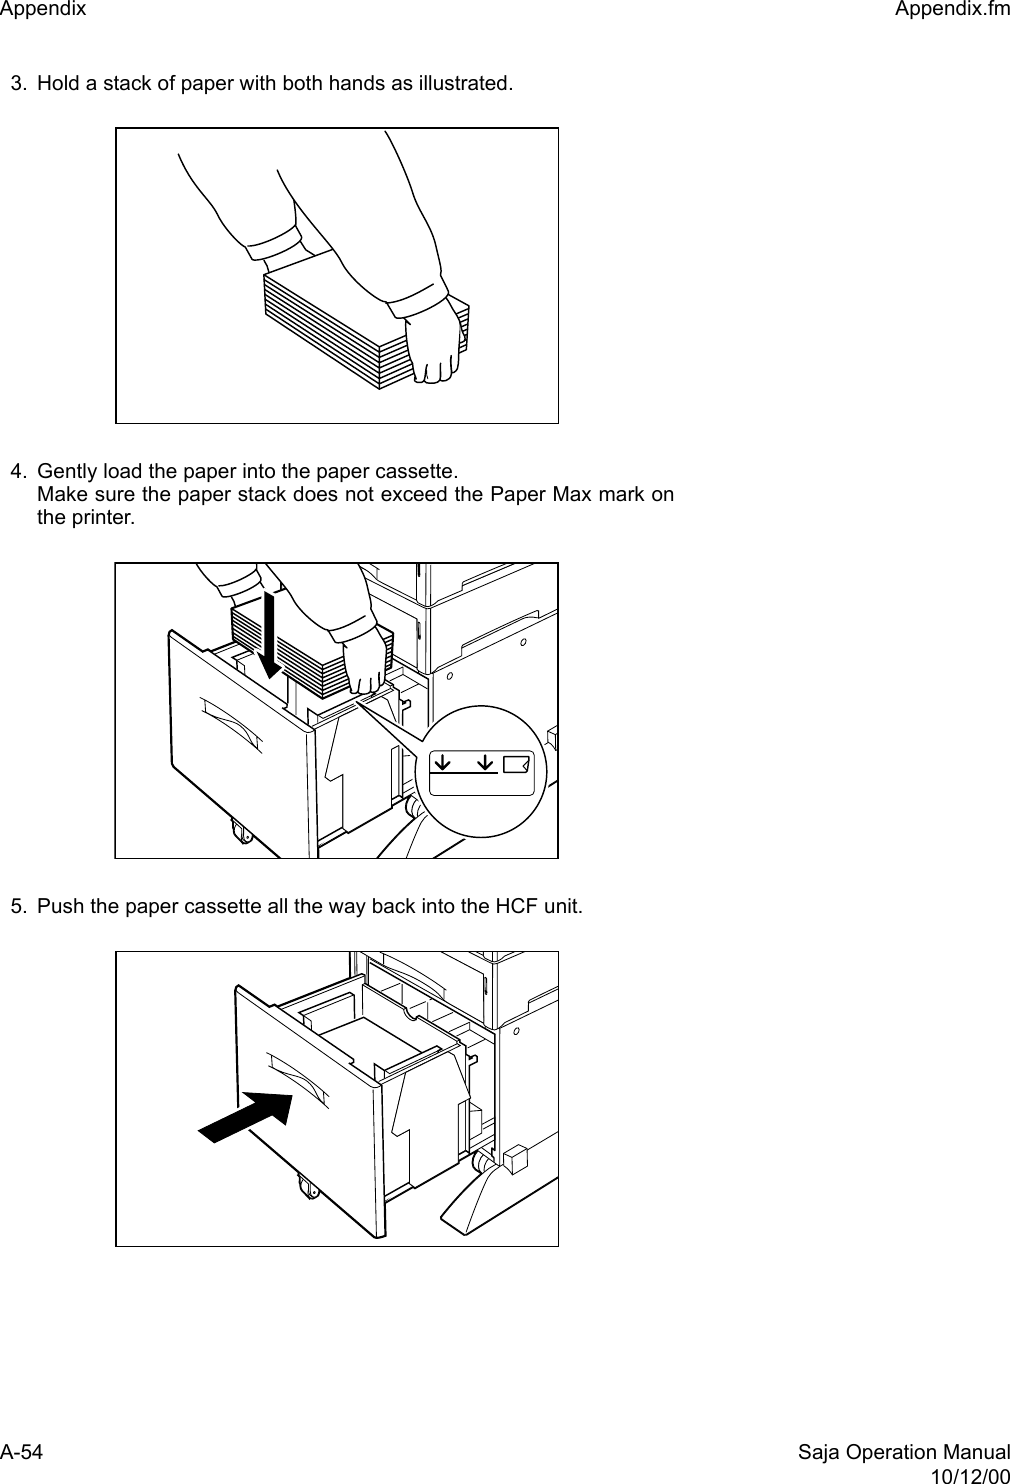 A-54 Saja Operation Manual10/12/00Appendix  Appendix.fm3. Hold a stack of paper with both hands as illustrated.4. Gently load the paper into the paper cassette.Make sure the paper stack does not exceed the Paper Max mark onthe printer.5. Push the paper cassette all the way back into the HCF unit.